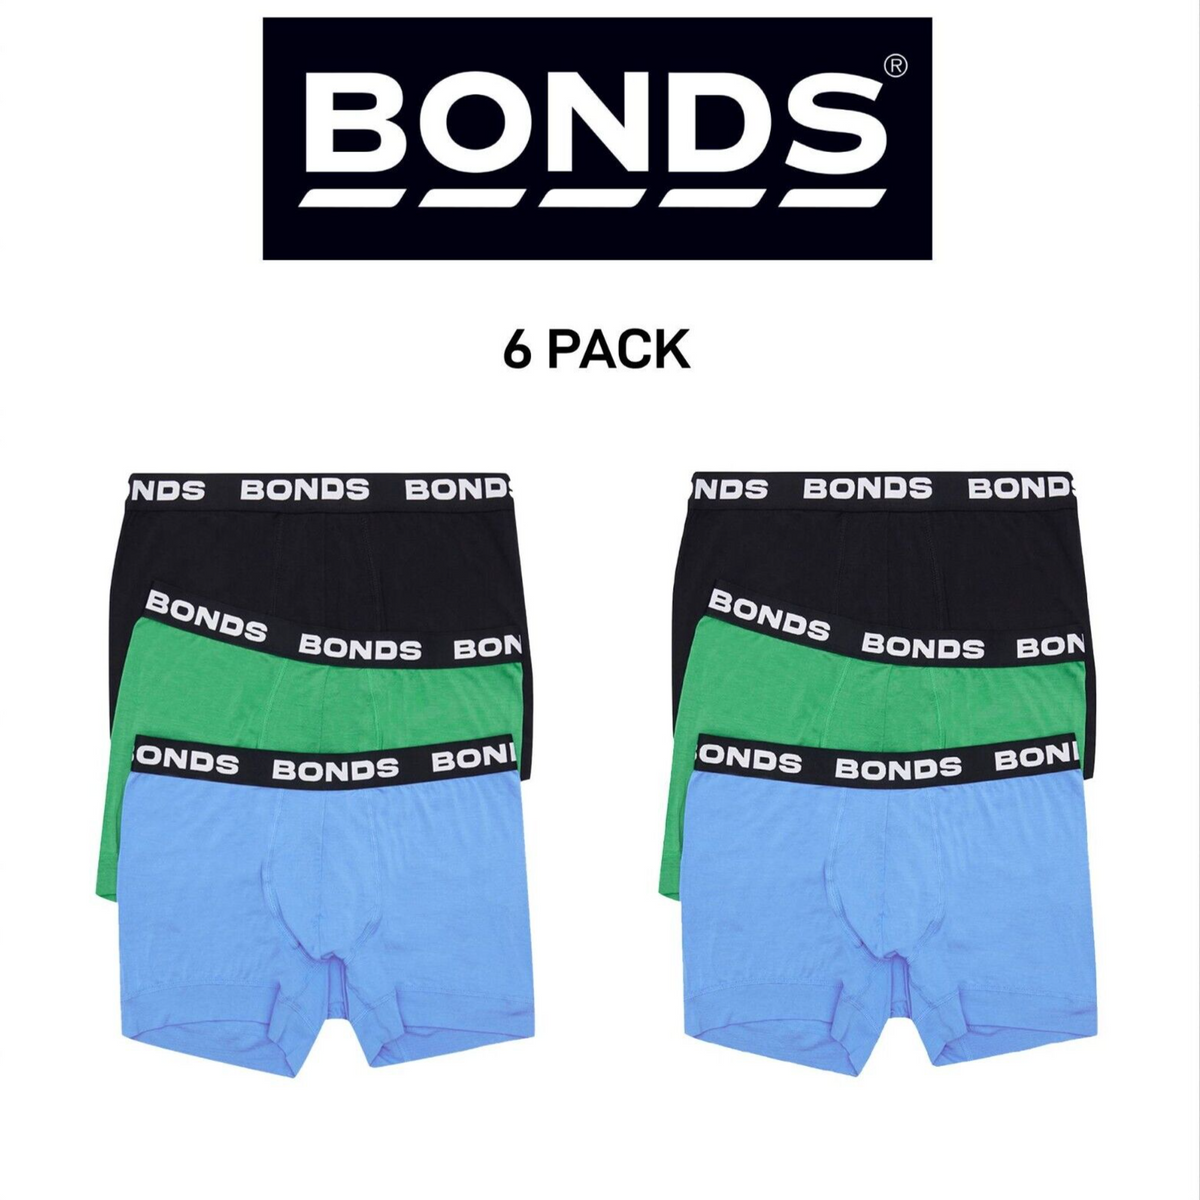 Bonds Mens Total Package Trunk Comfy Super Soft and Breathable 6 Pack MWK83A